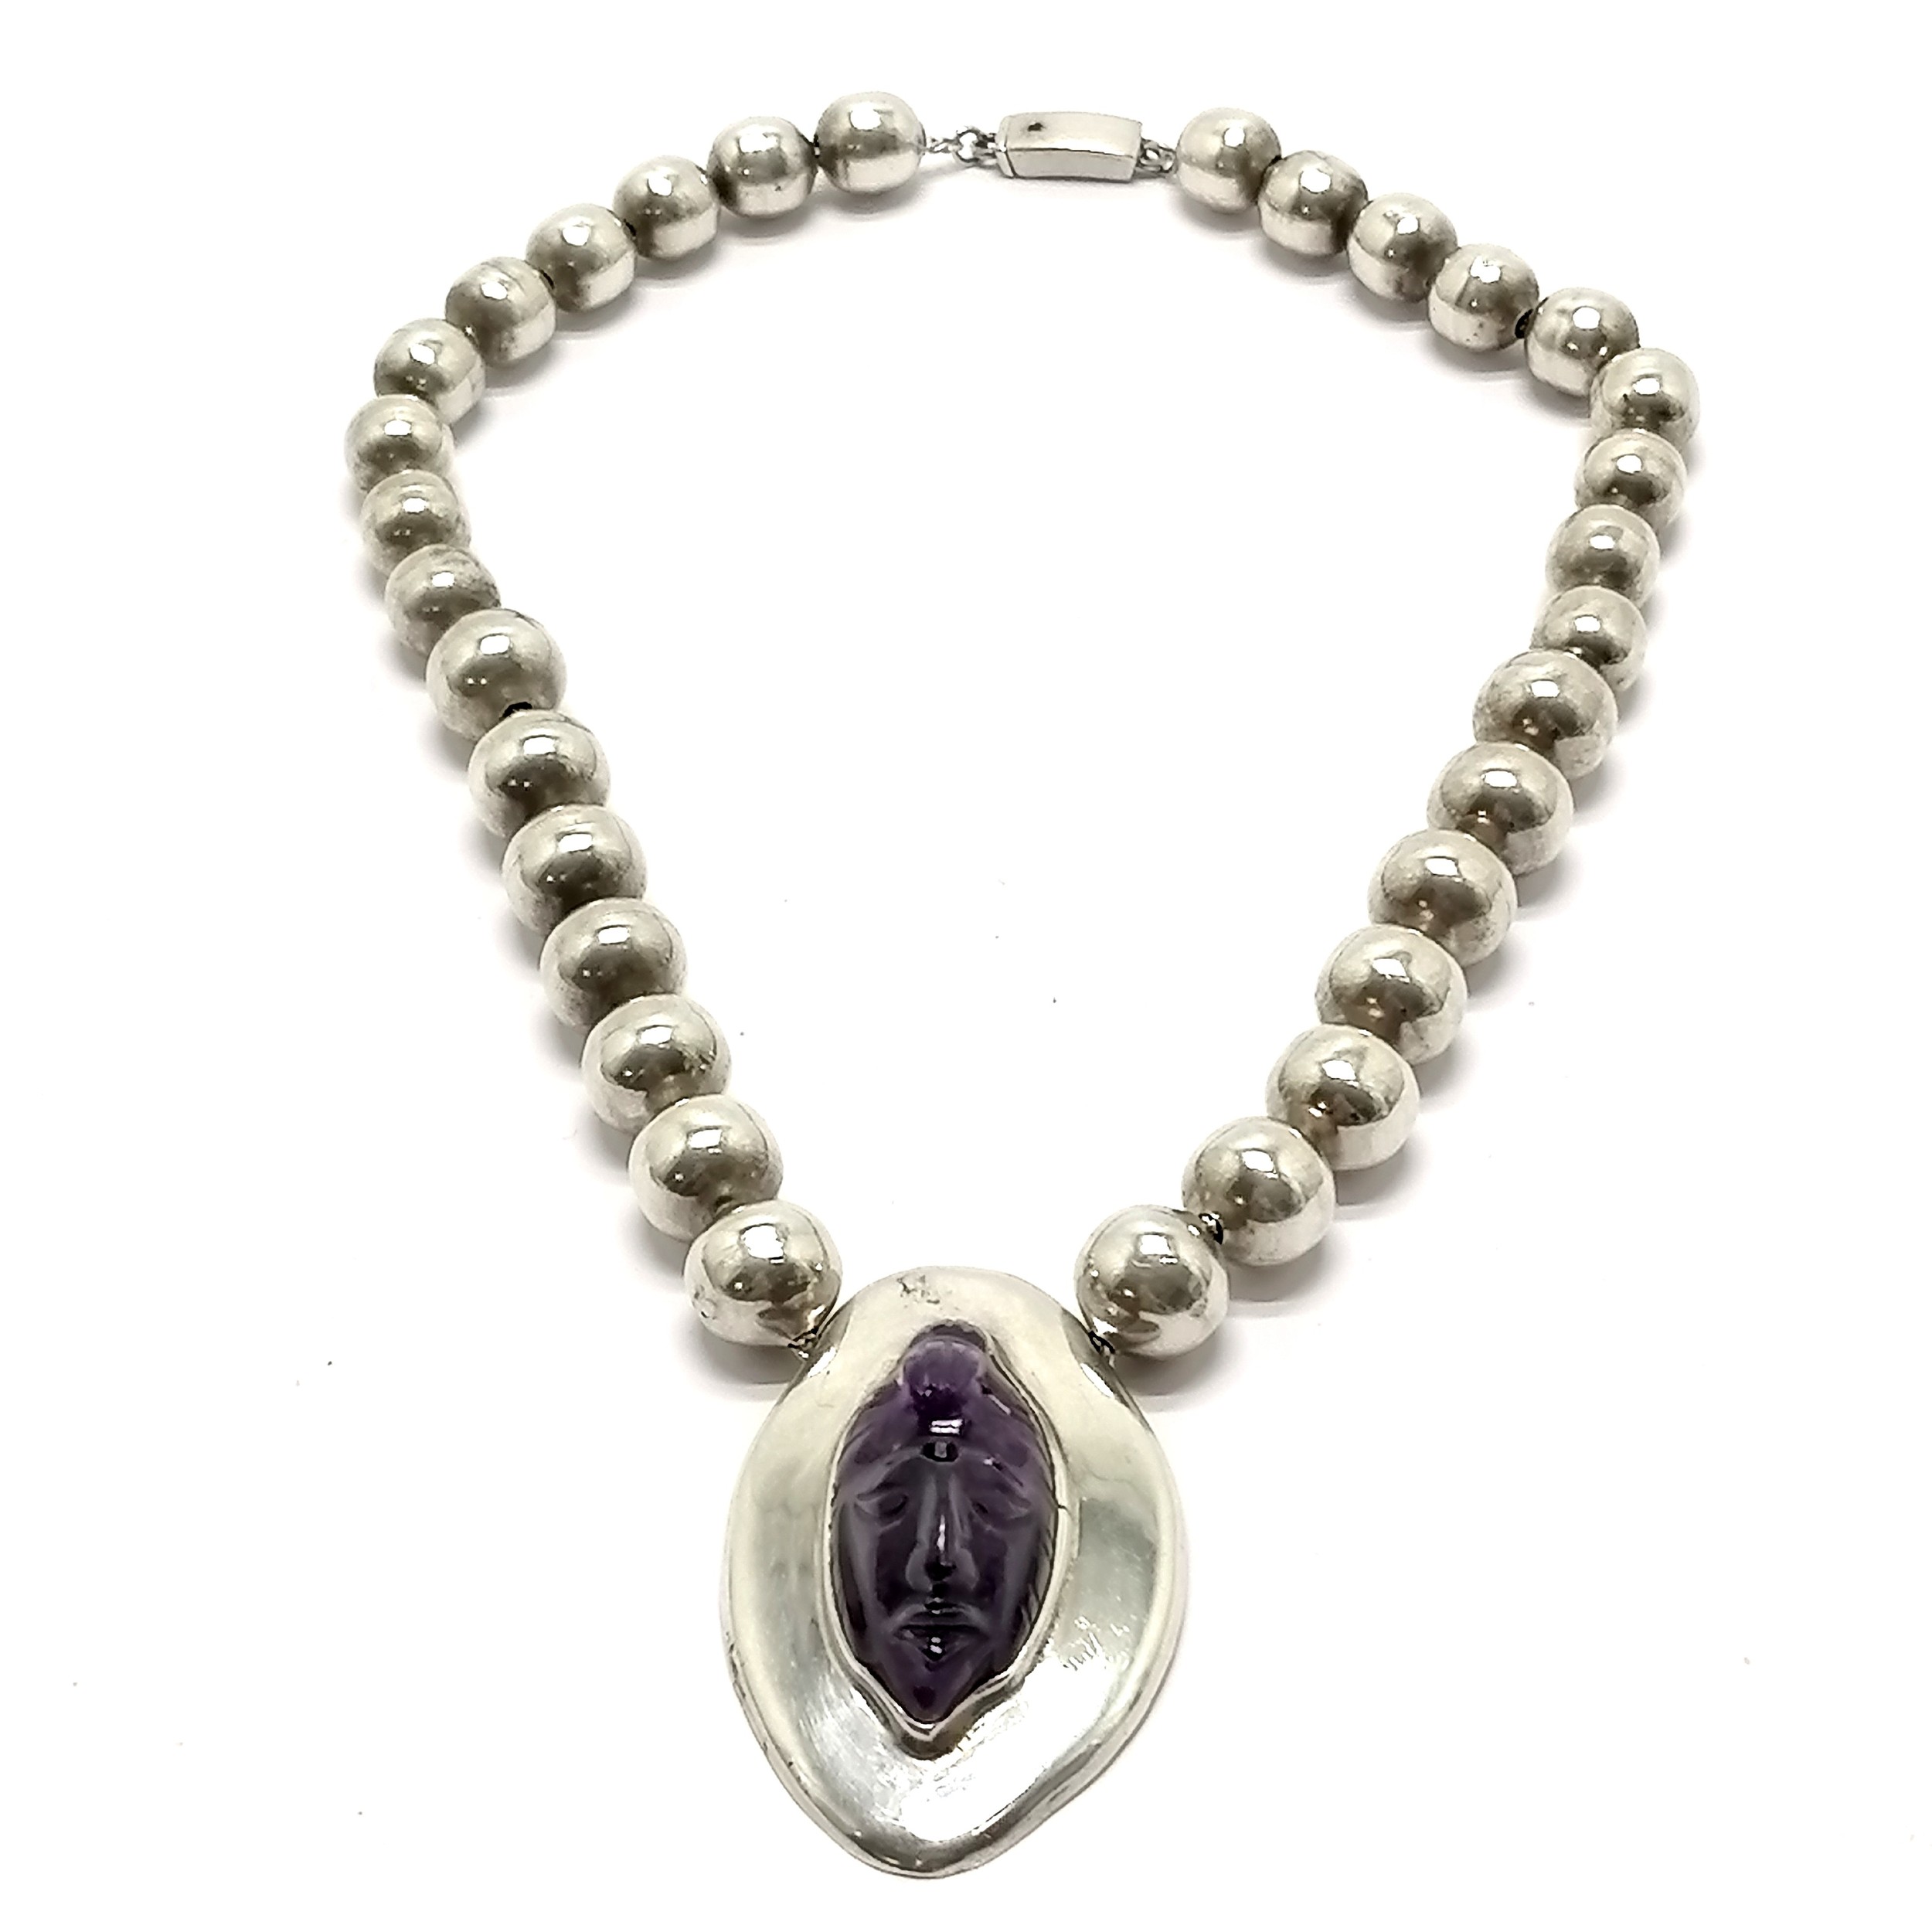 Mexican silver 'ball' necklace with carved amethyst face pendant - 38cm long & 88g total weight